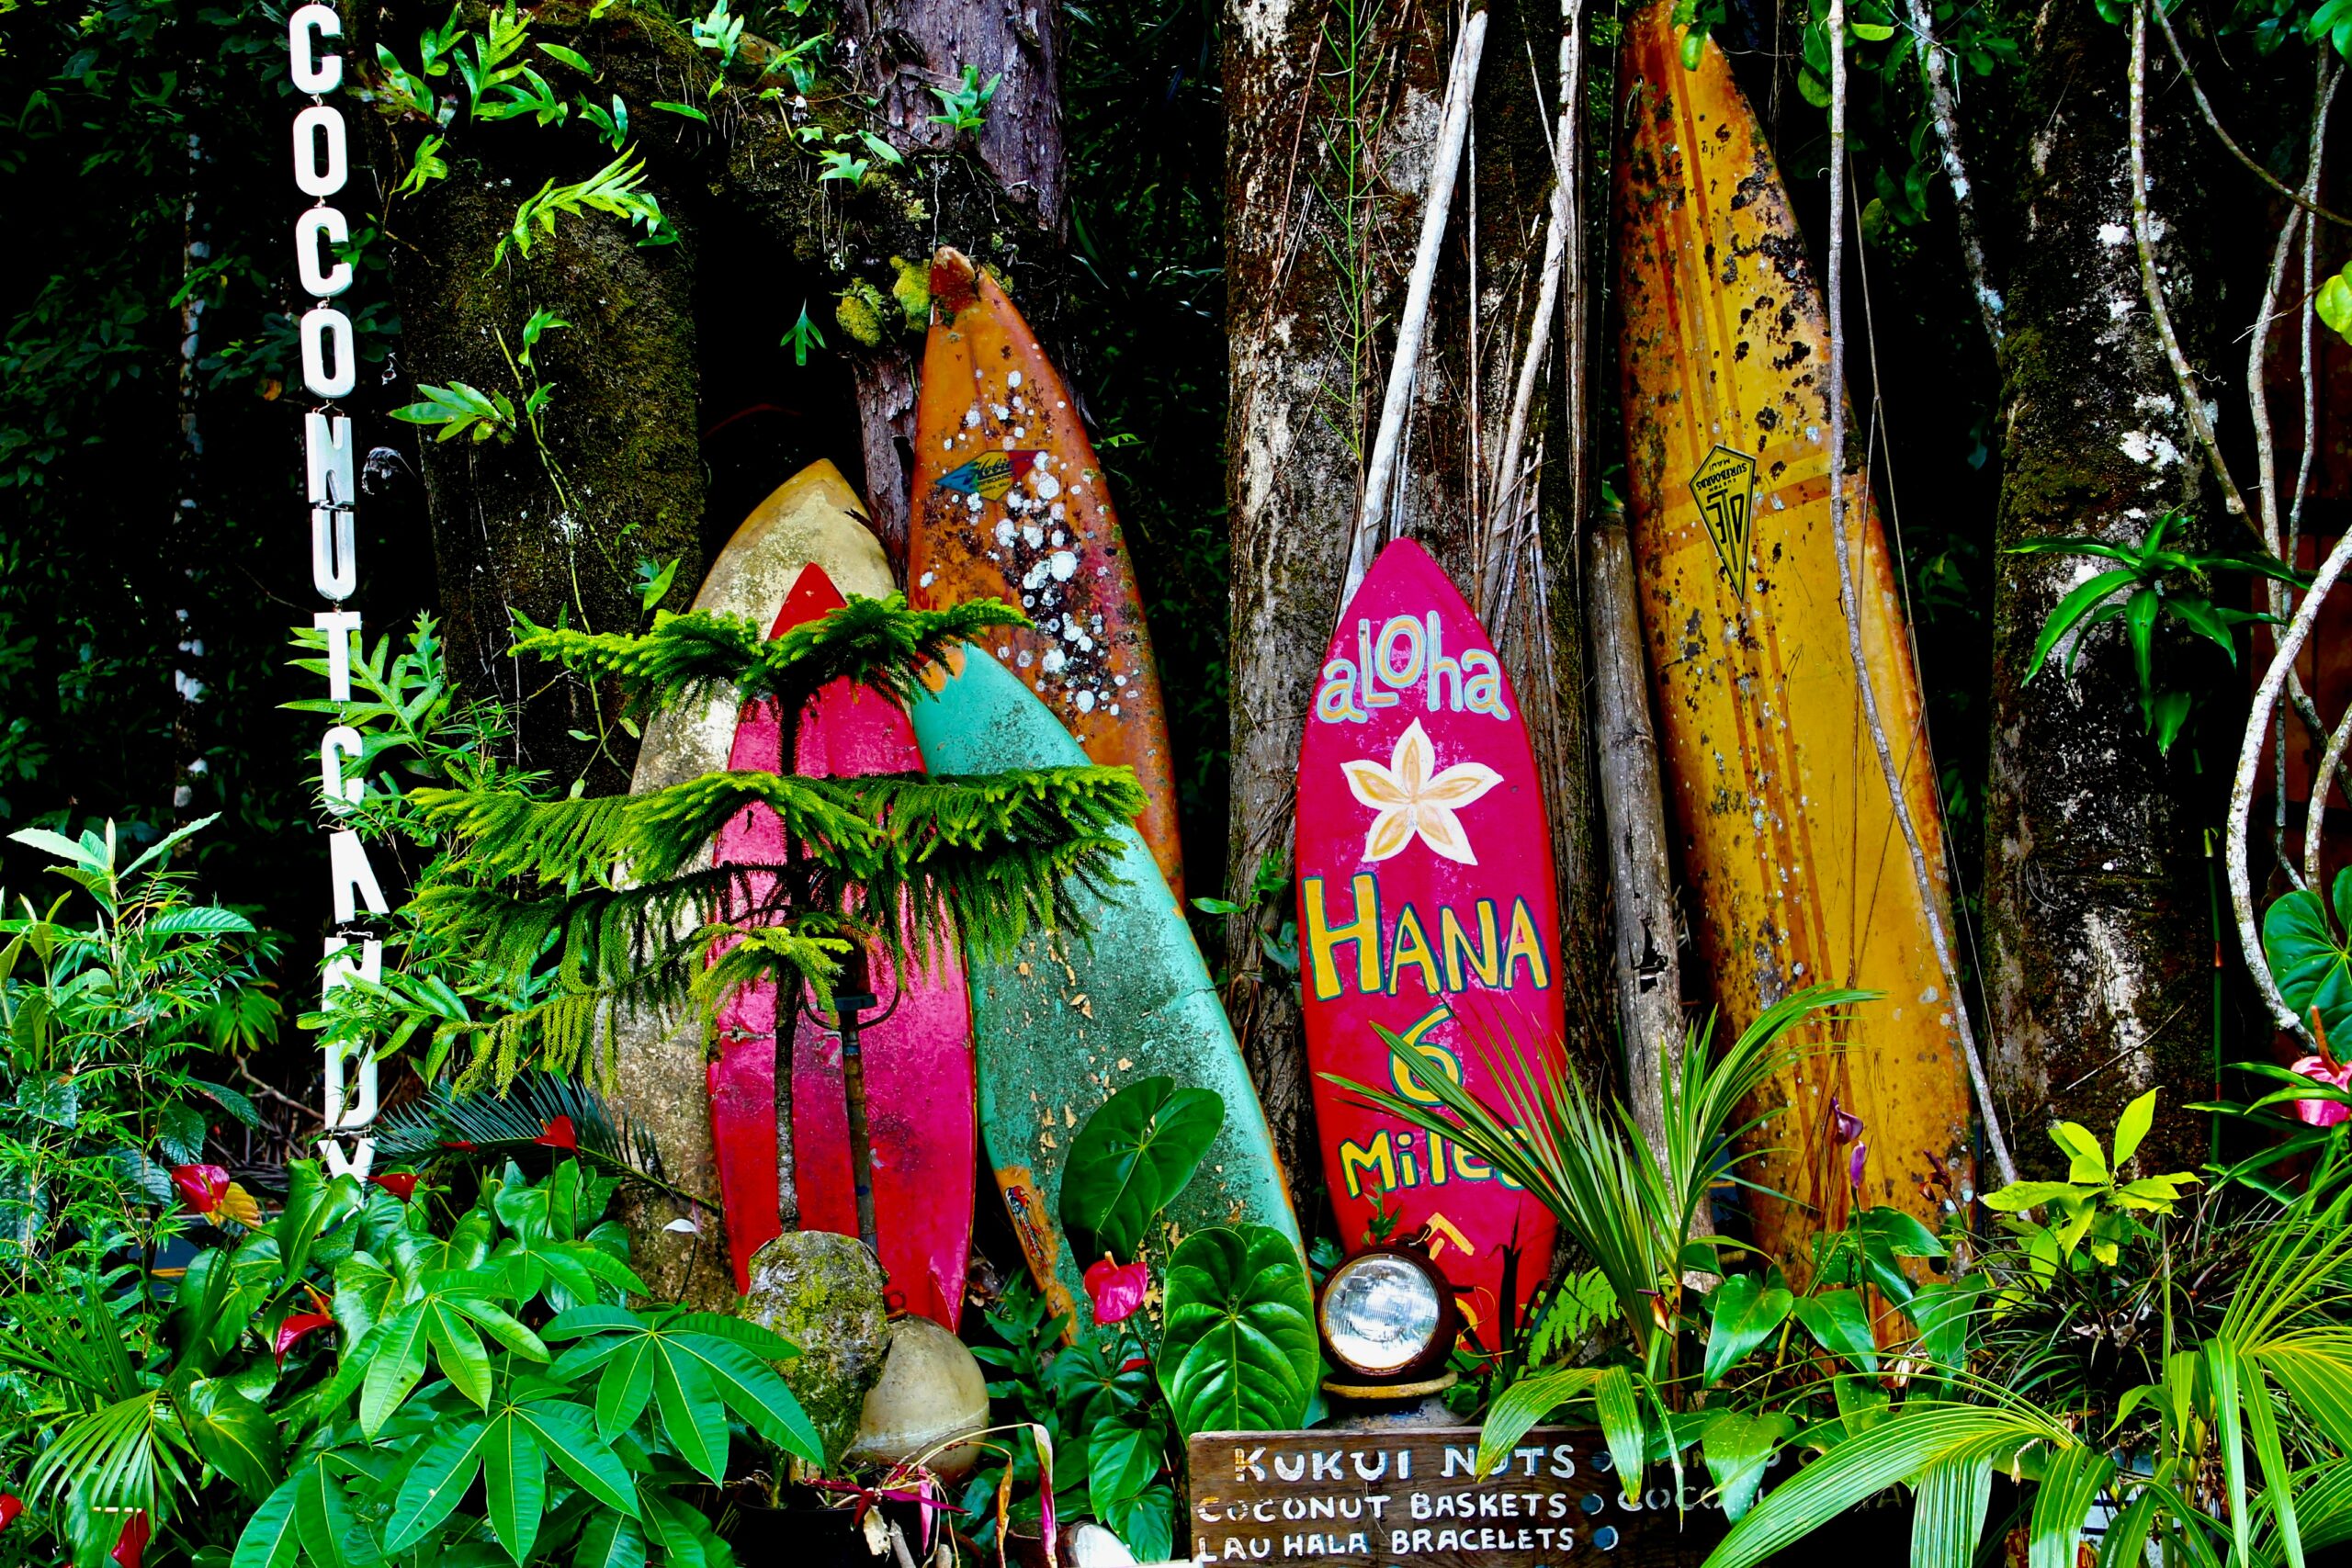 Hawaii banned rentals for tourists, learn more about why. 
Pictured: surf boards on a tree in Hawaii